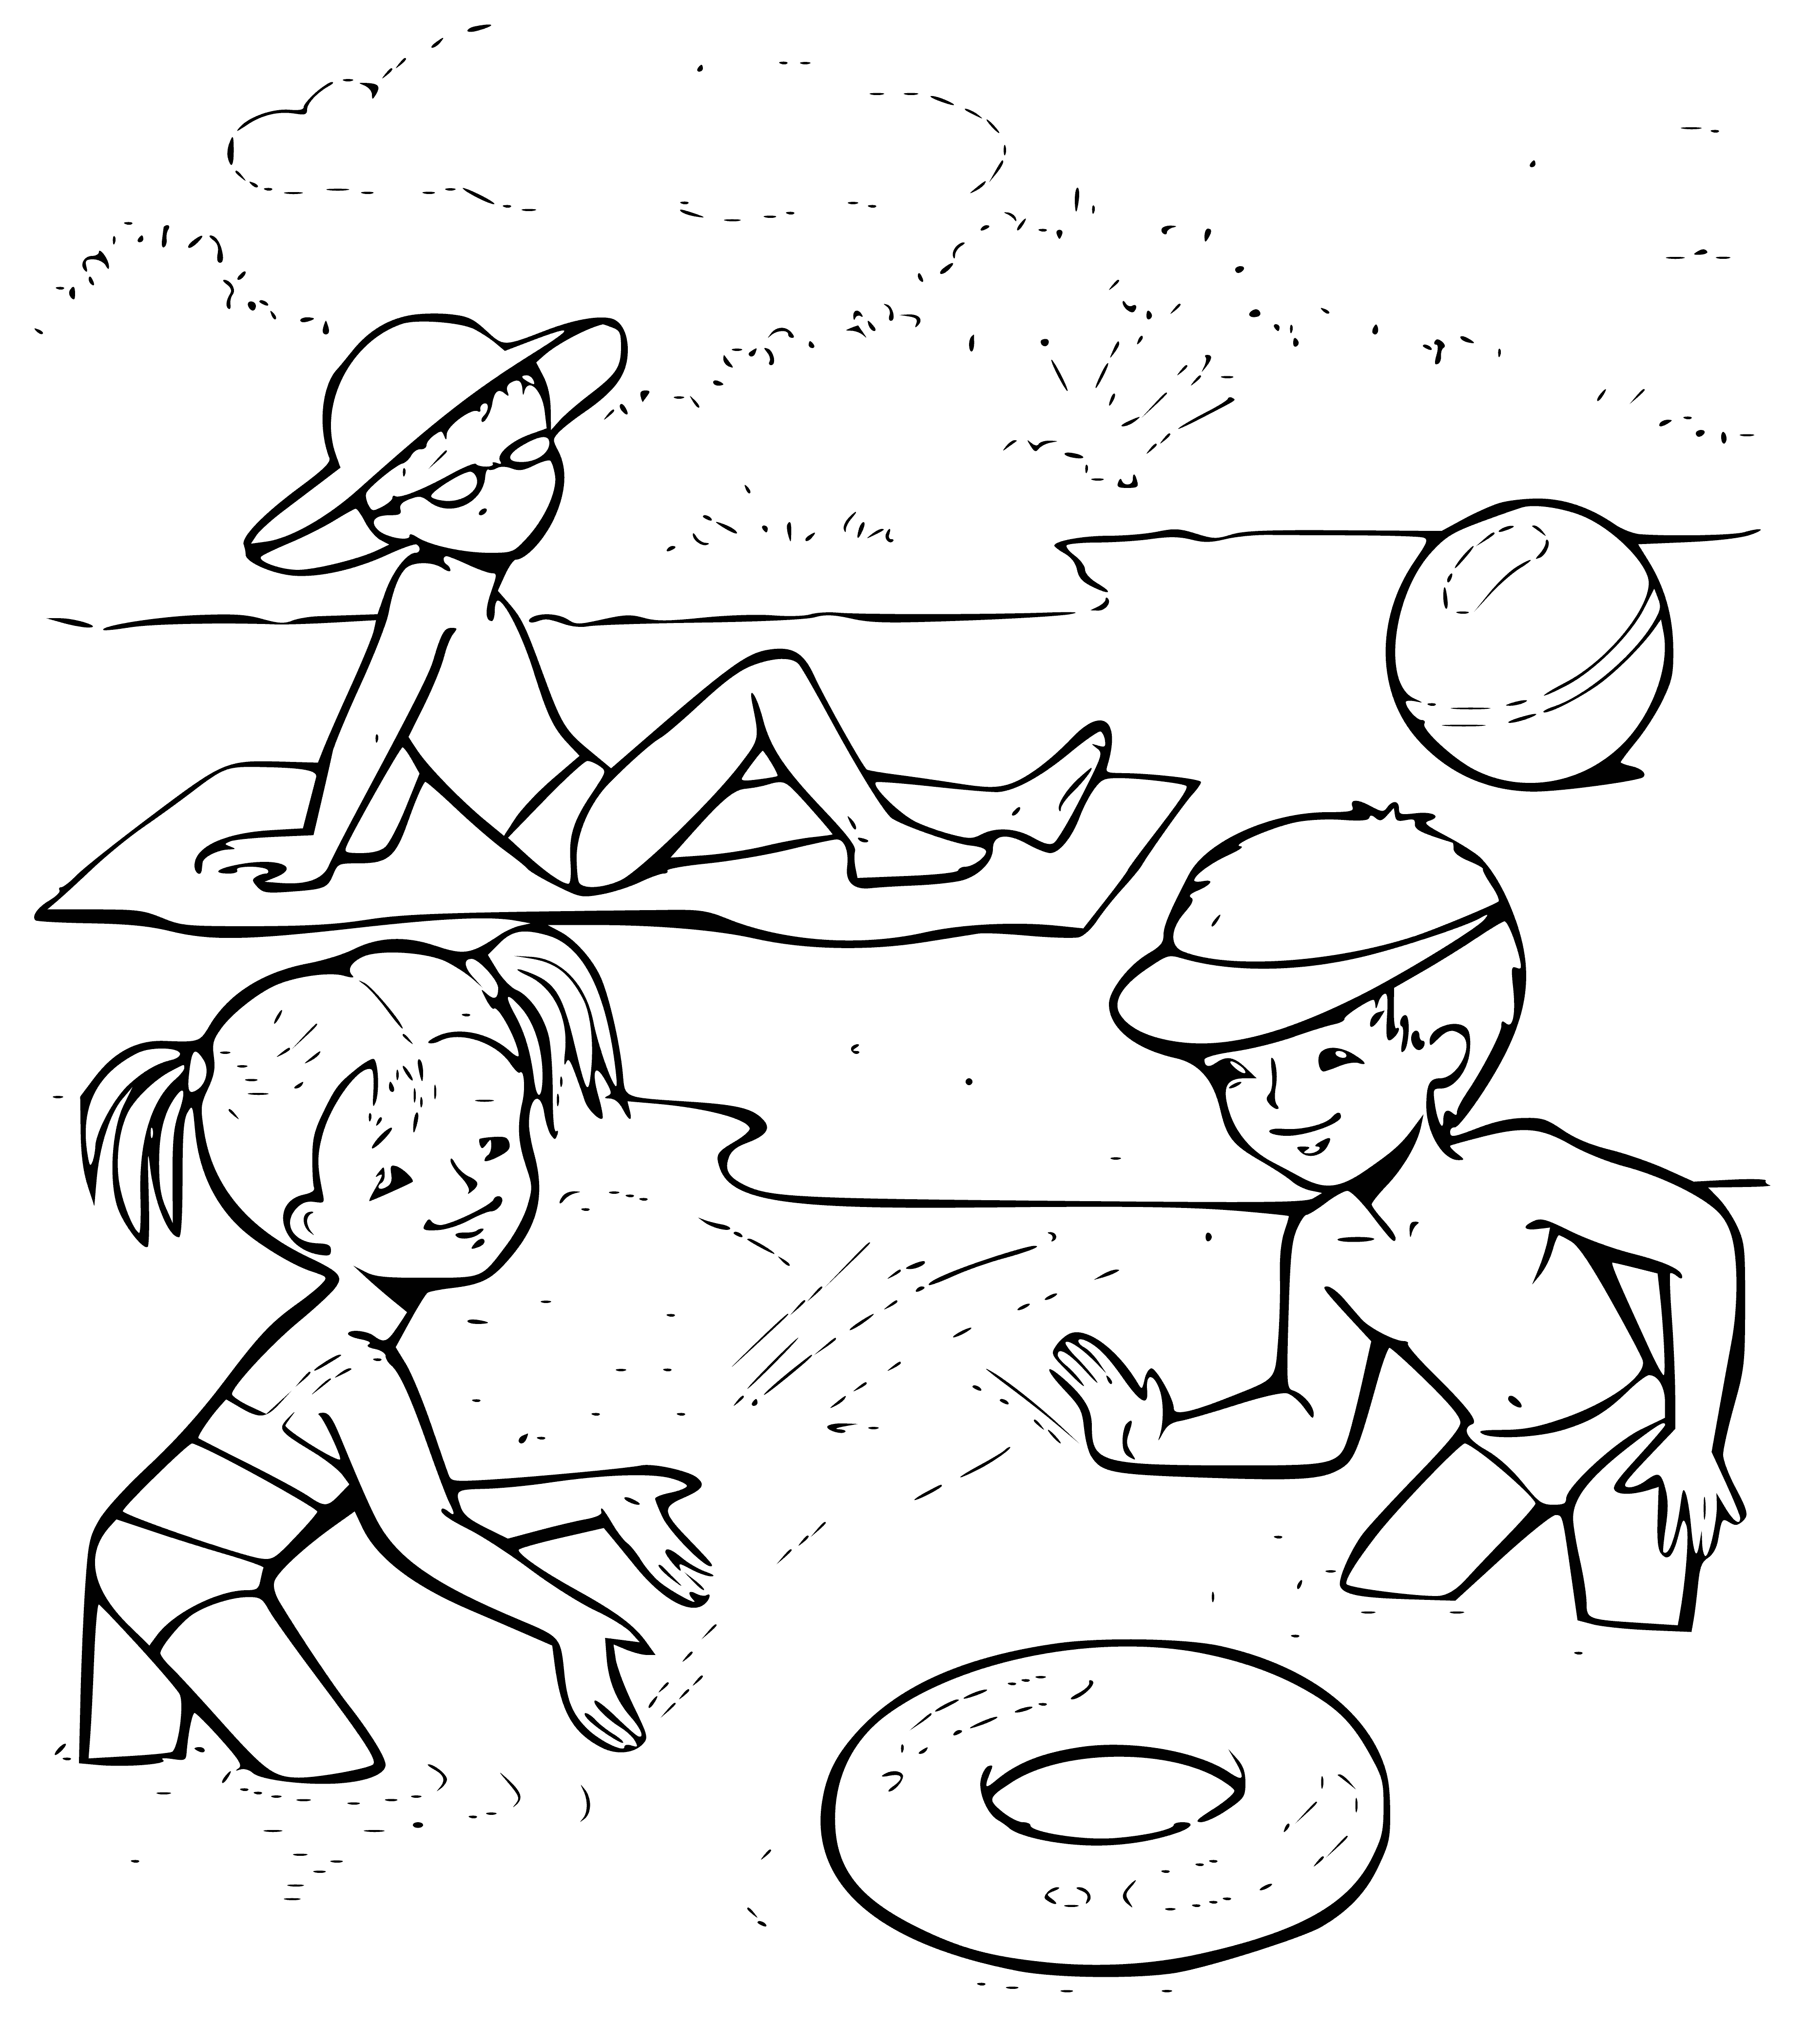 Summer fun by the river coloring page